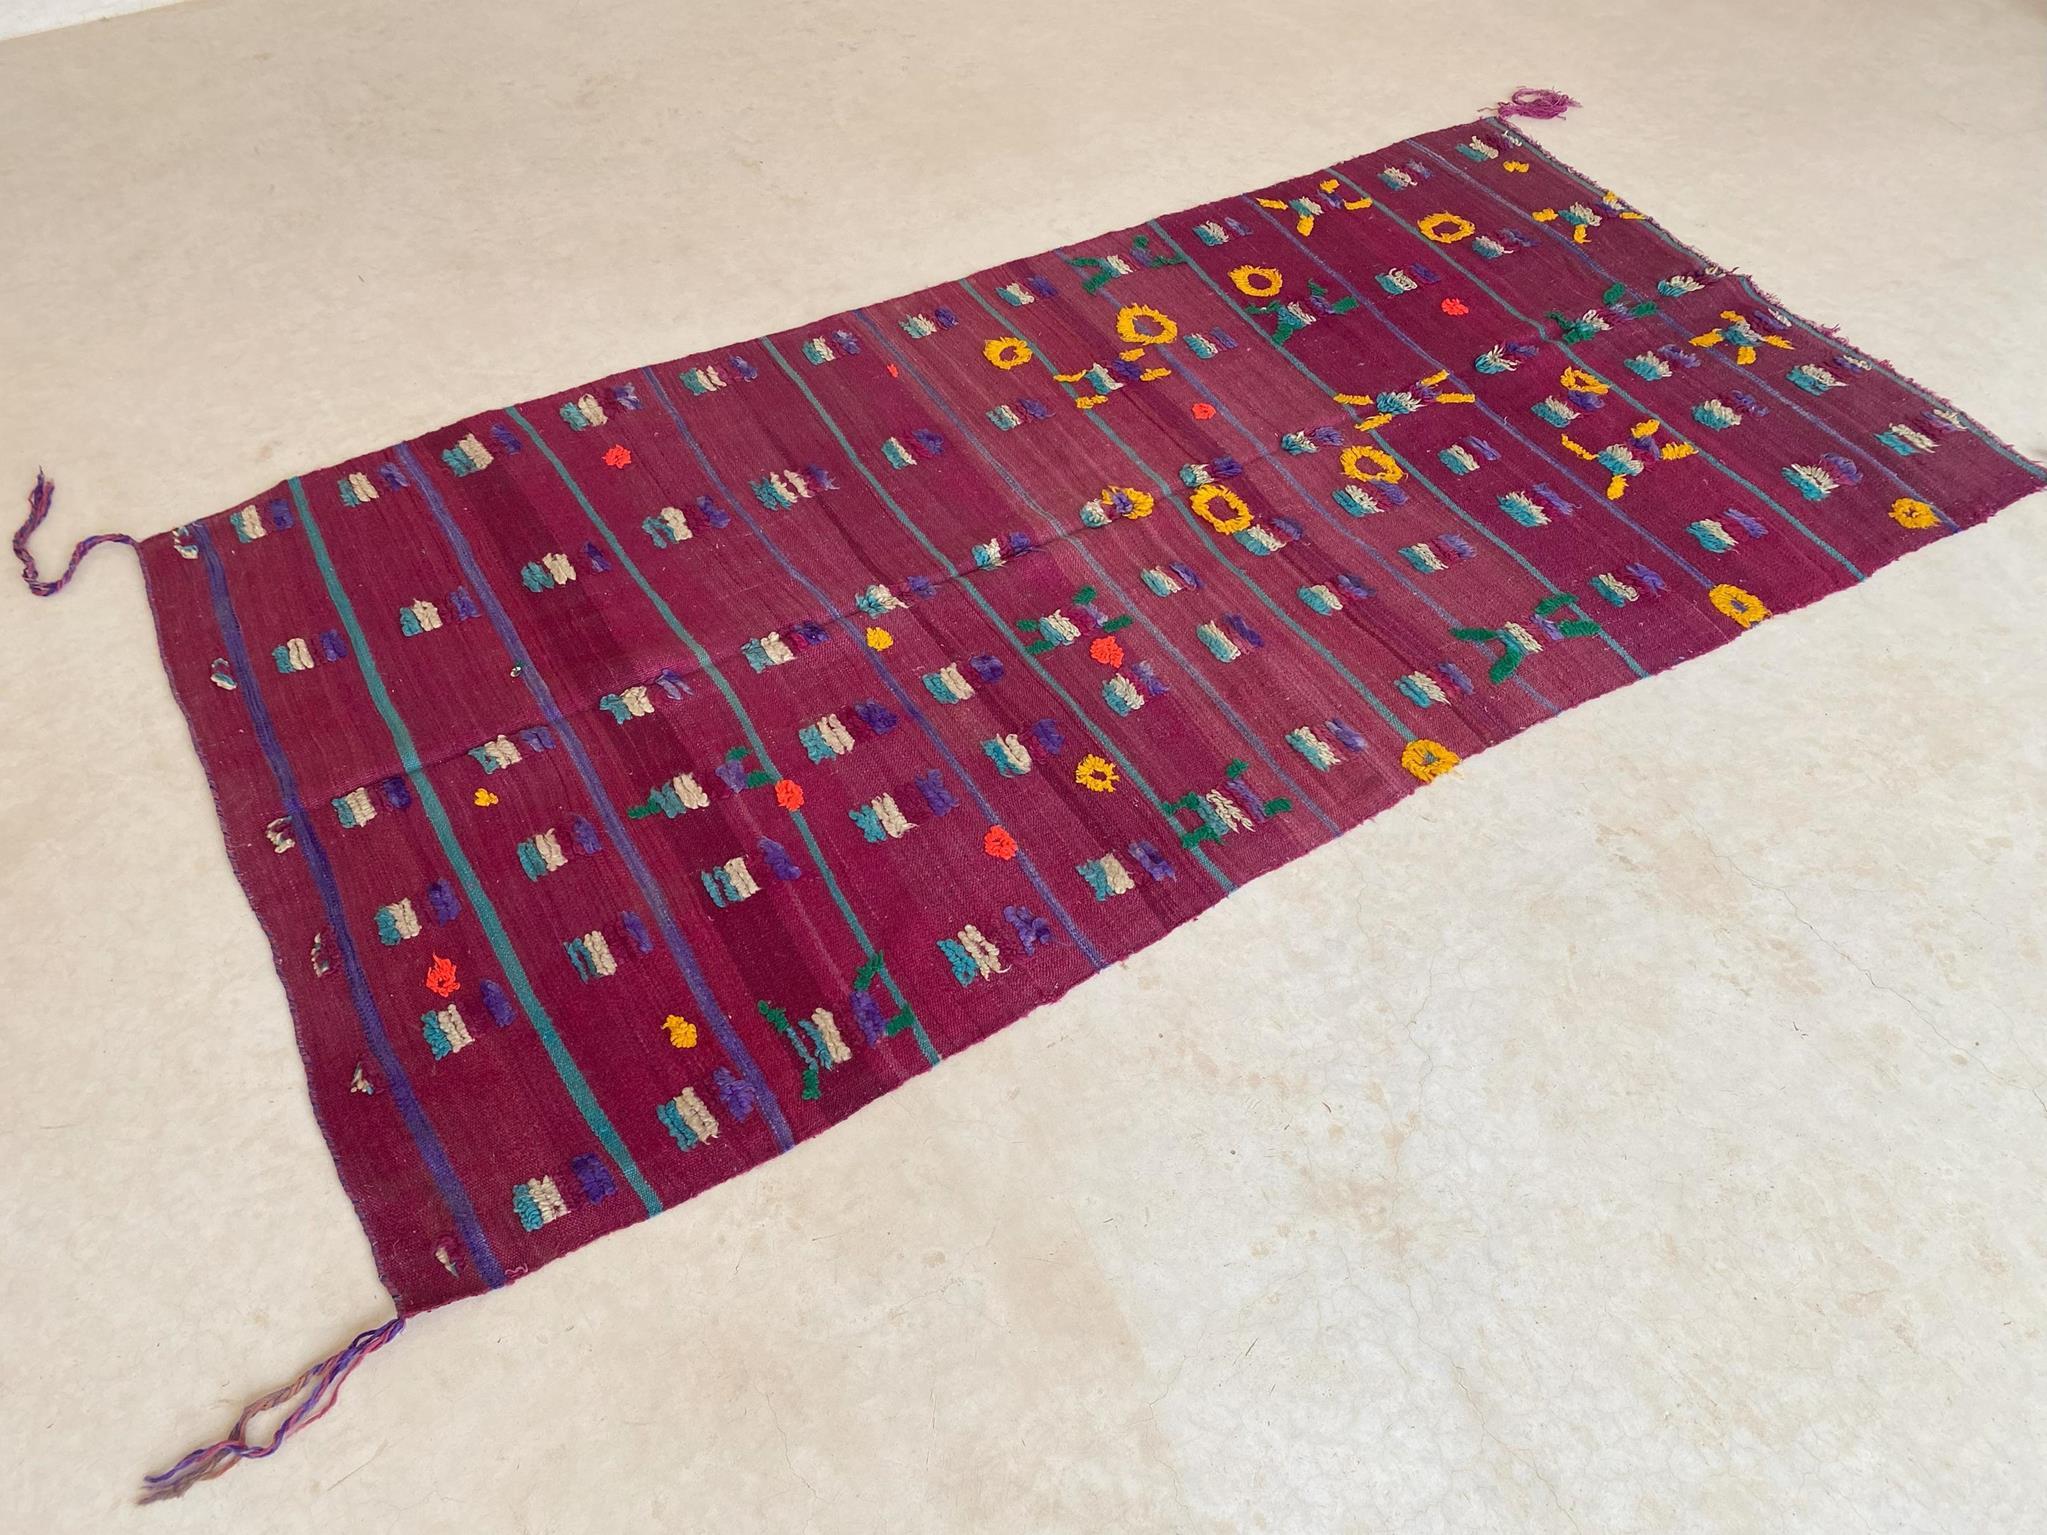 Vintage Moroccan Kilim textile - Purple and yellow - 4.1x8.3feet / 127x252cm In Good Condition For Sale In Marrakech, MA